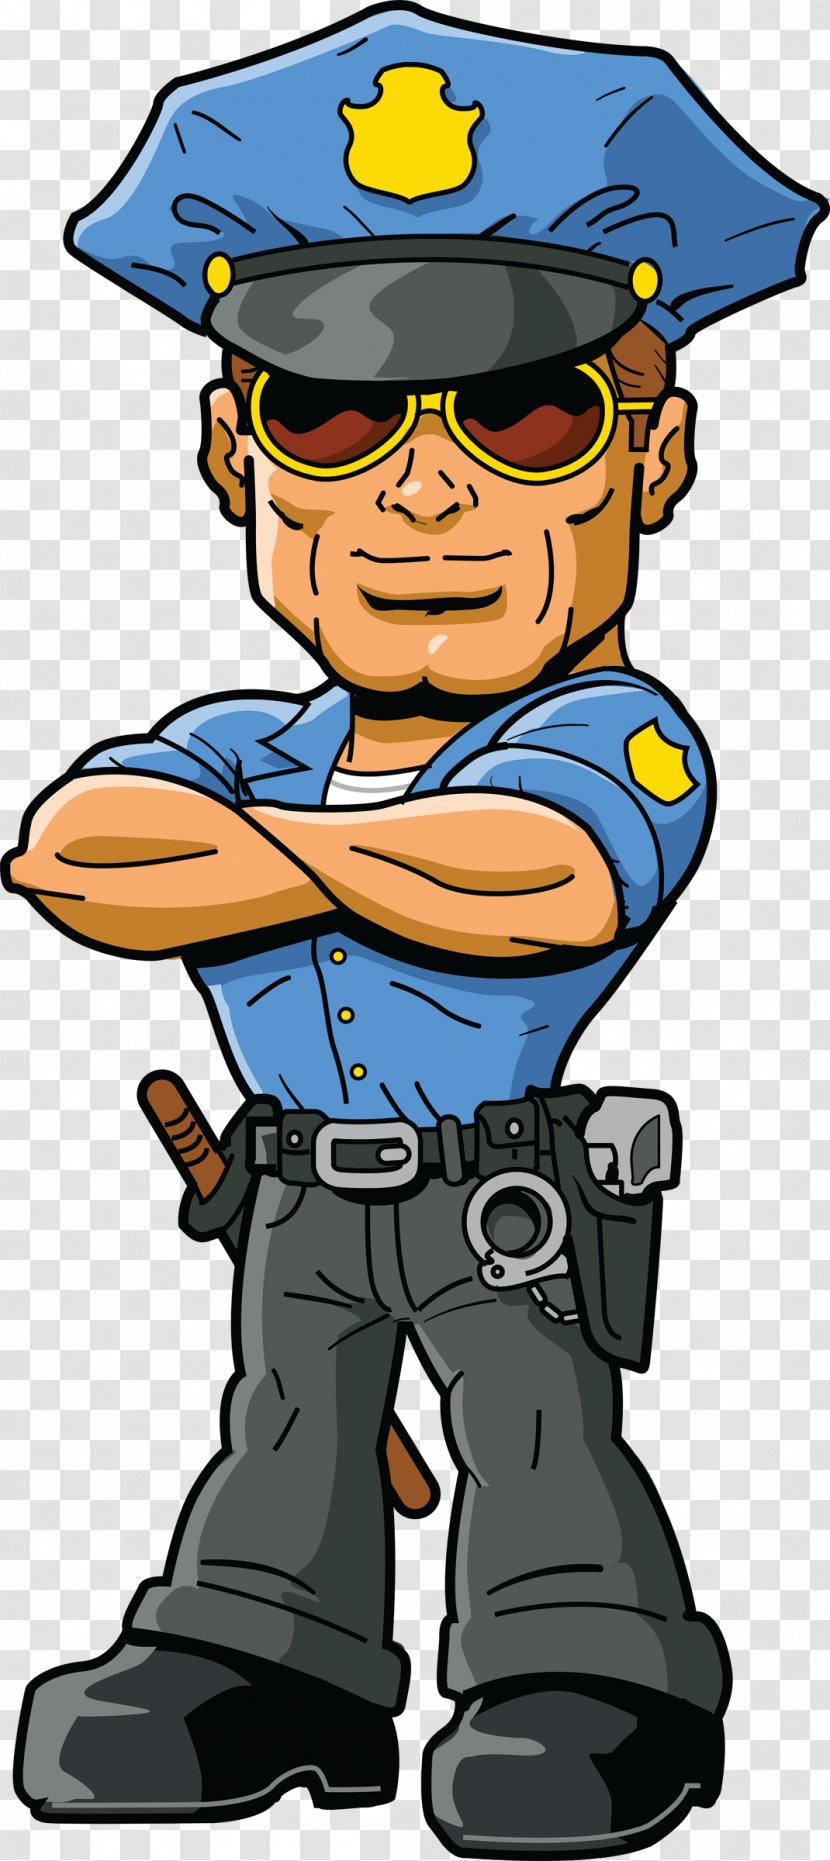 Cartoon Police Officer Drawing - annuitycontract